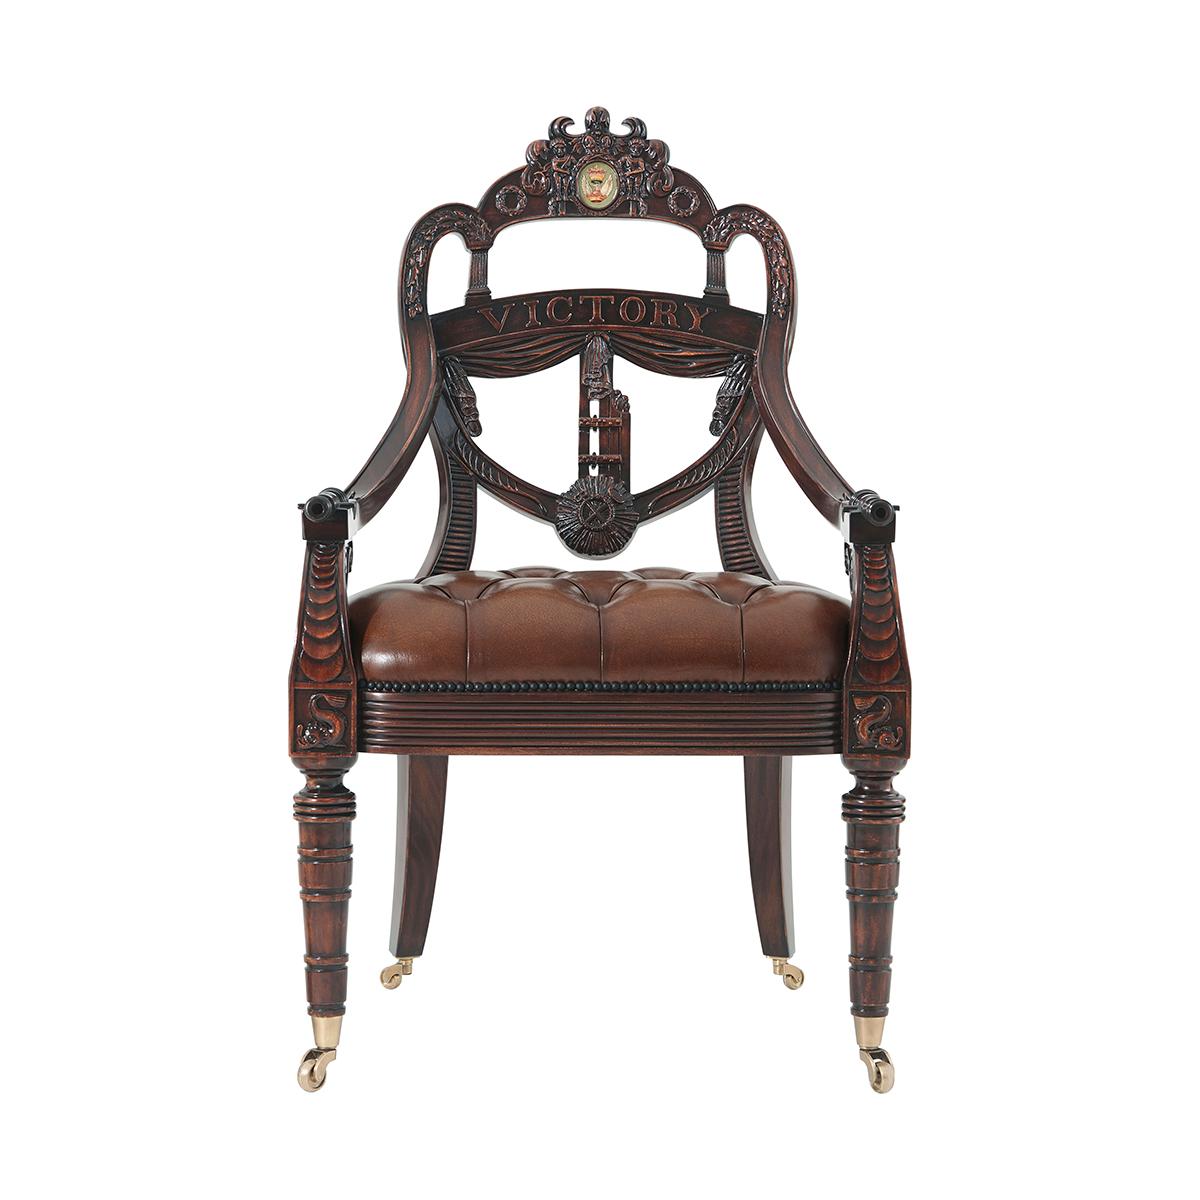 An exceptionally well hand-carved mahogany library armchair, the back in the shape of a ship's transom carved with a Coat of Arms centered by the Spencer crest and flanked by Victory wreaths. Inspired by a Regency original.

Dimensions: 27.25